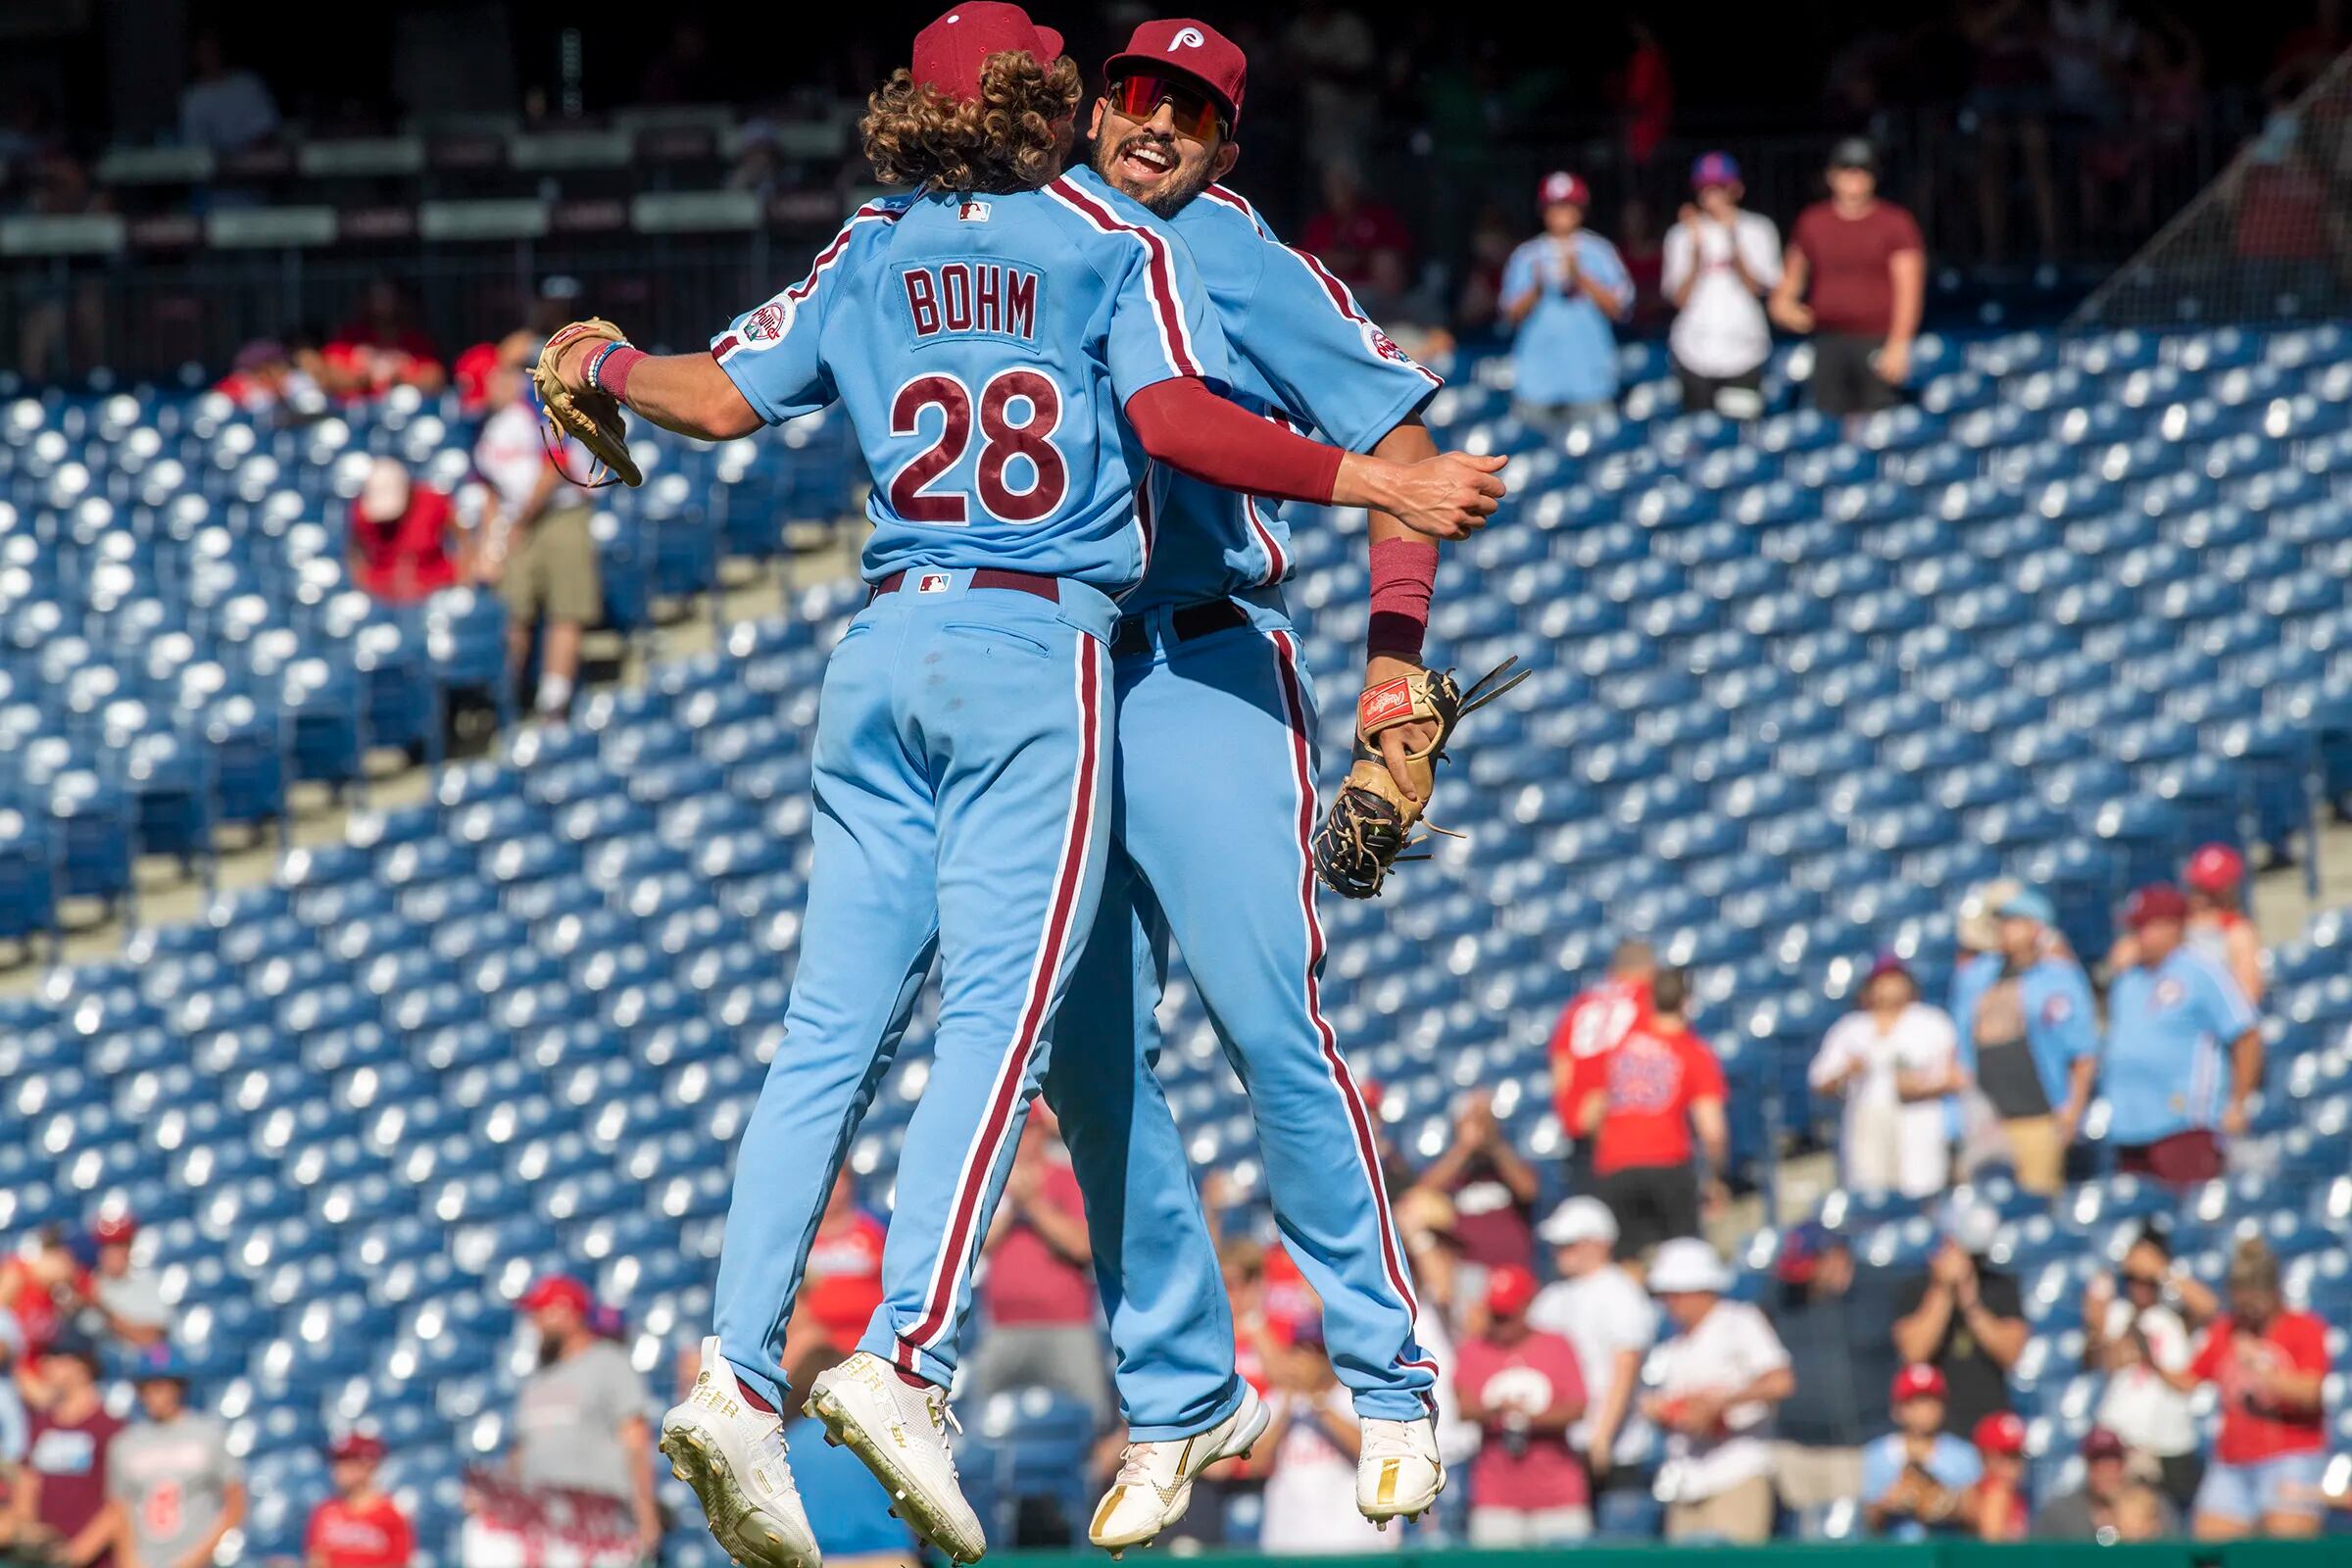 Obstruction call helps Phils sweep Nats for 14th win in 16 - WTOP News